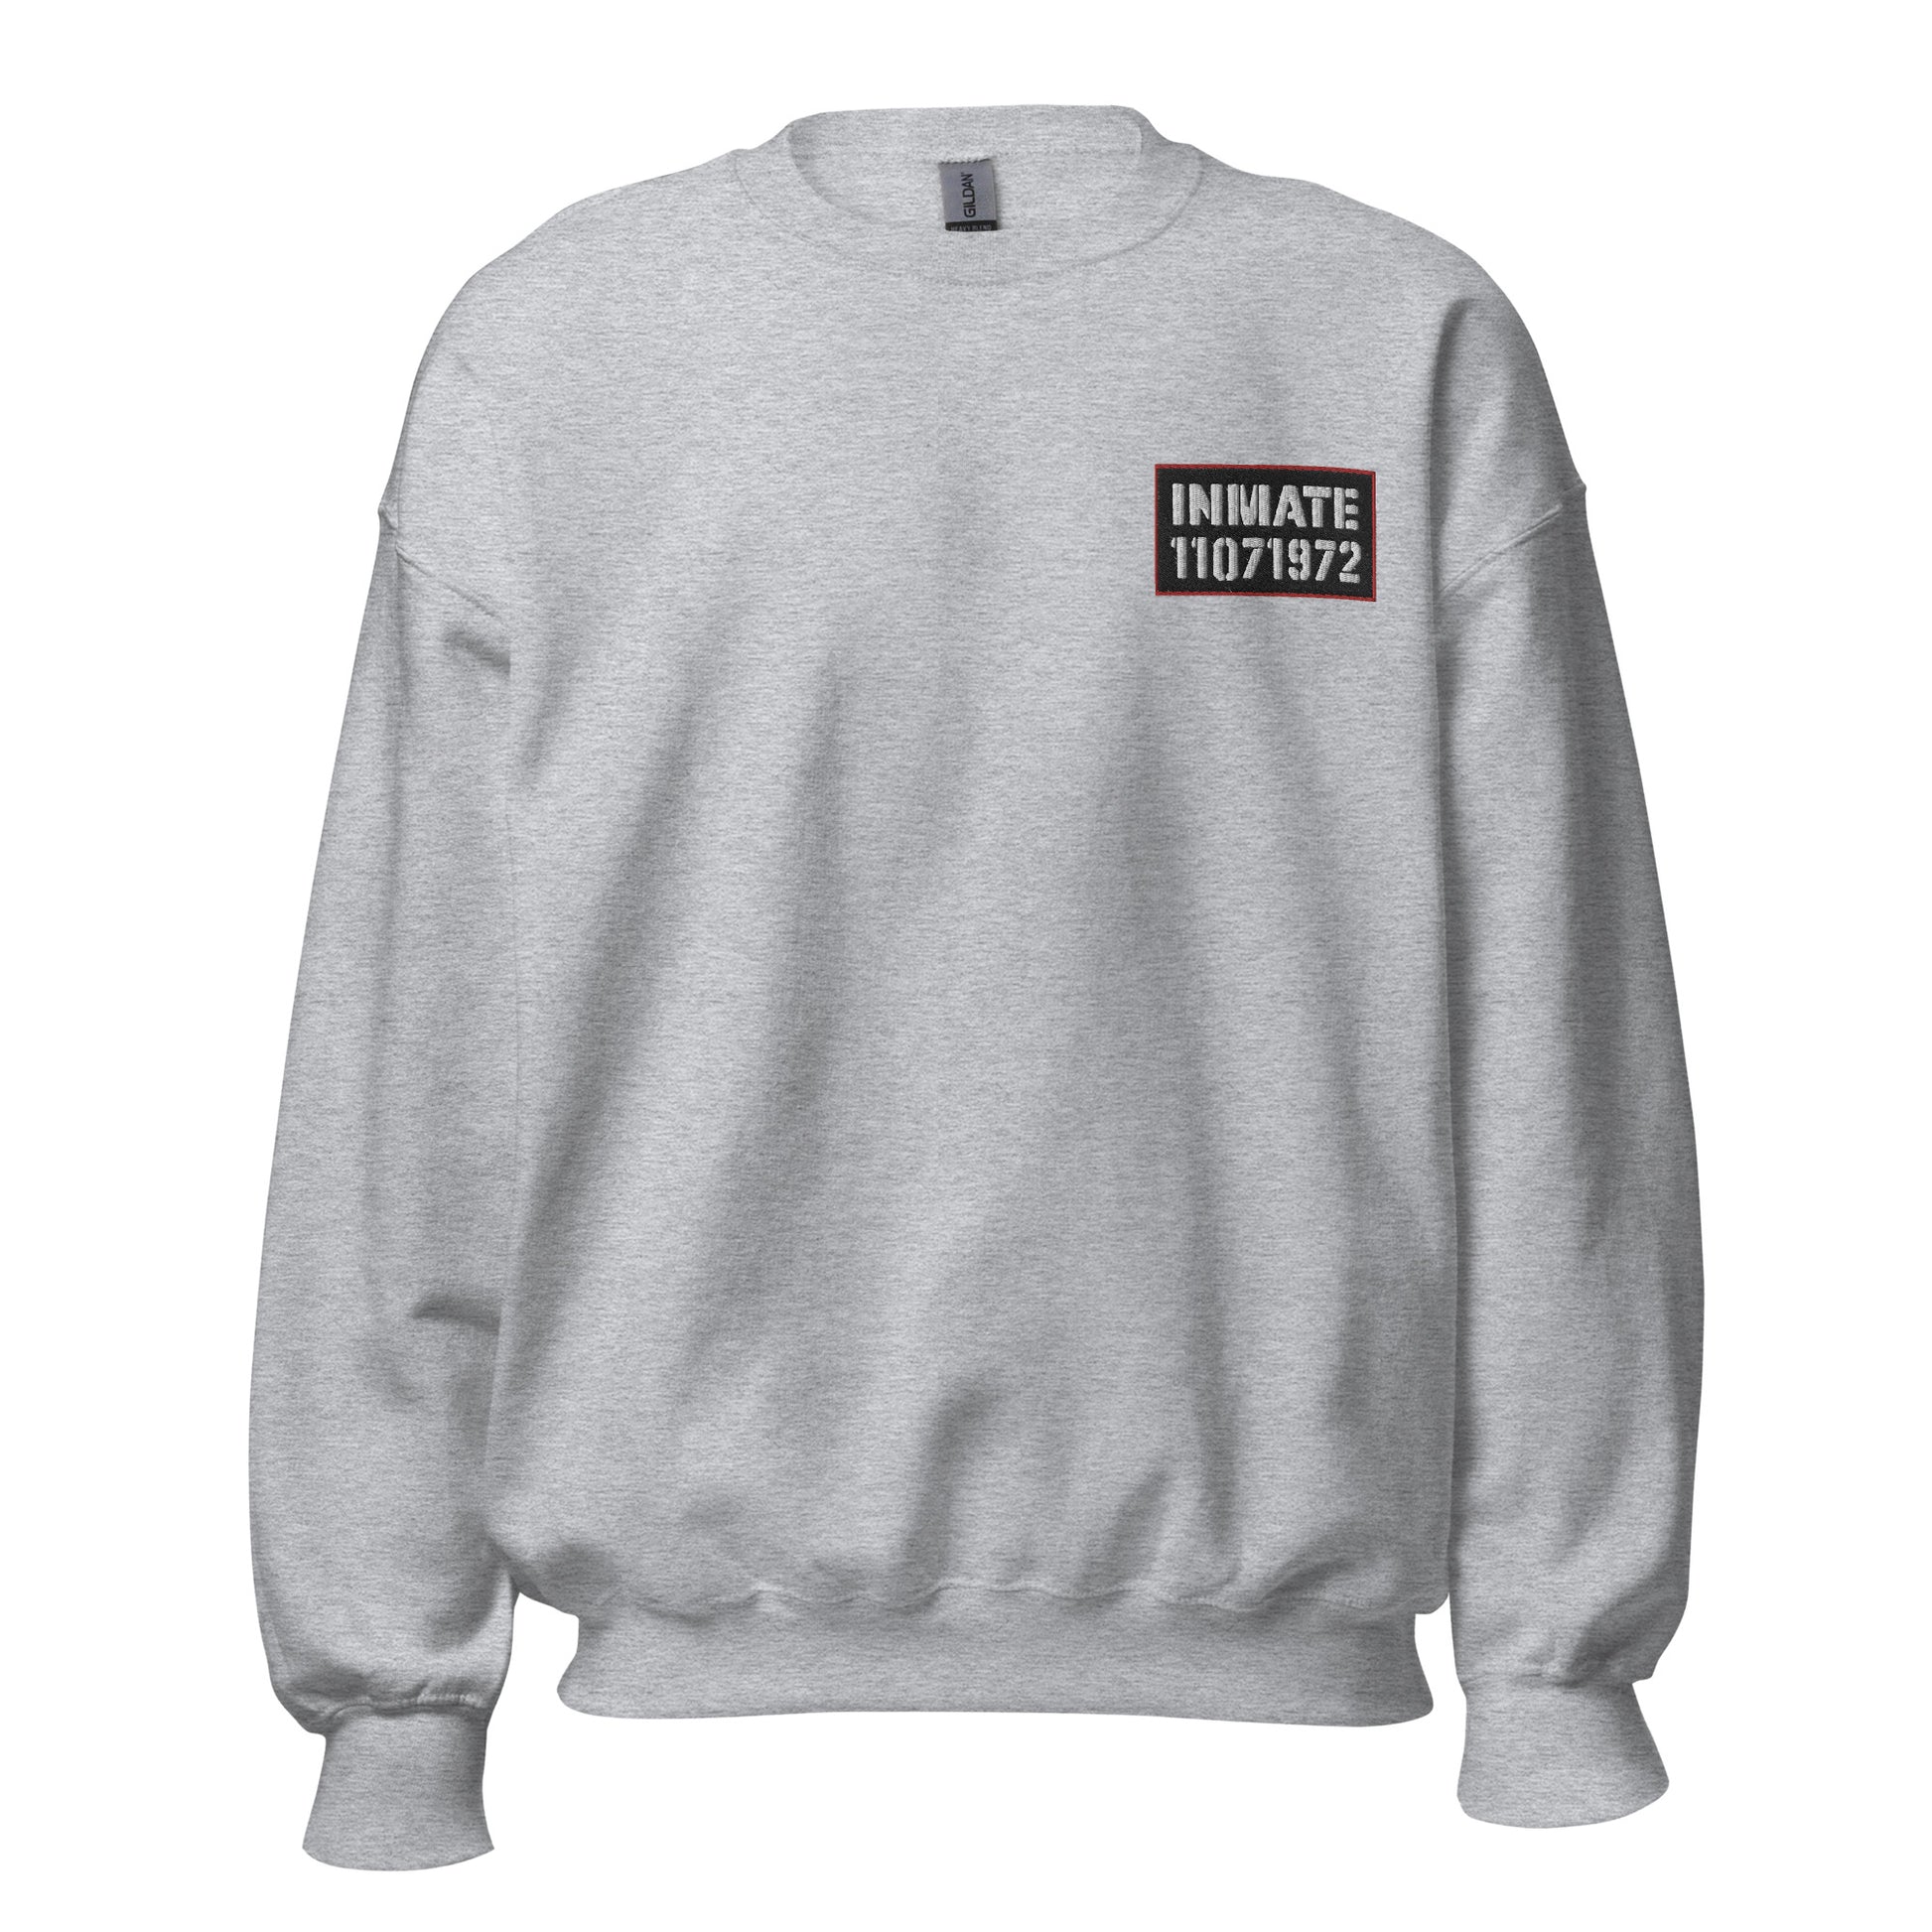 Heather gray crewneck sweatshirt with 'Inmate' and an inmate number embroidered on left chest.